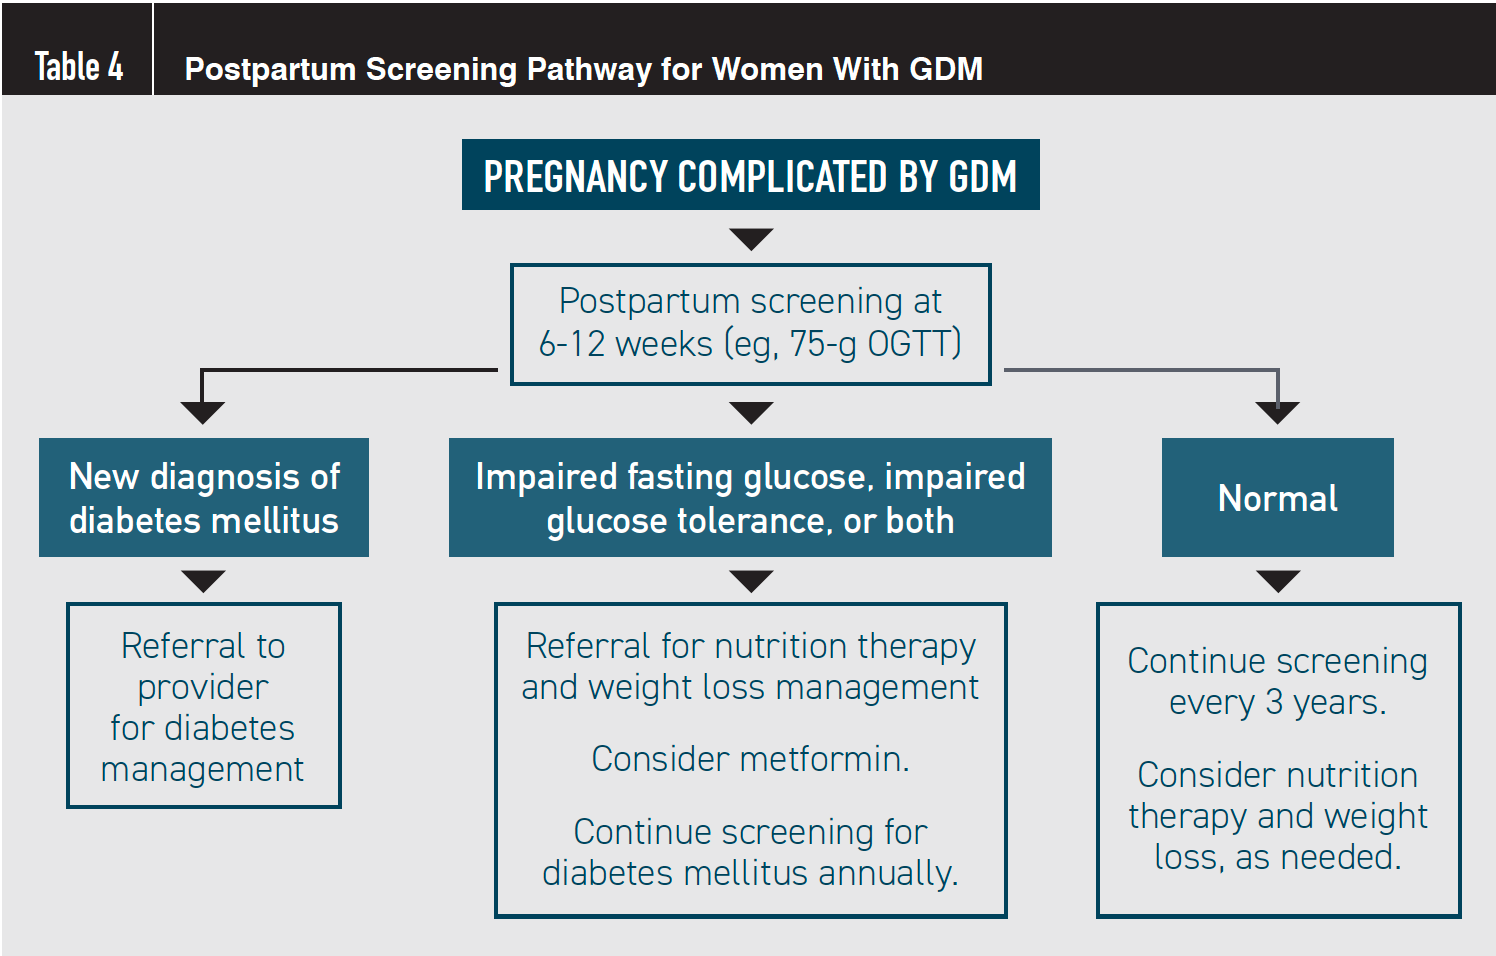 Table 4. Postpartum Screening Pathway for Women With GDM

Modified from Gabbe’s Obstetrics: Normal and Problem Pregnancies, 8th ed.

GDM, gestational diabetes mellitus; OGTT, oral glucose tolerance test.